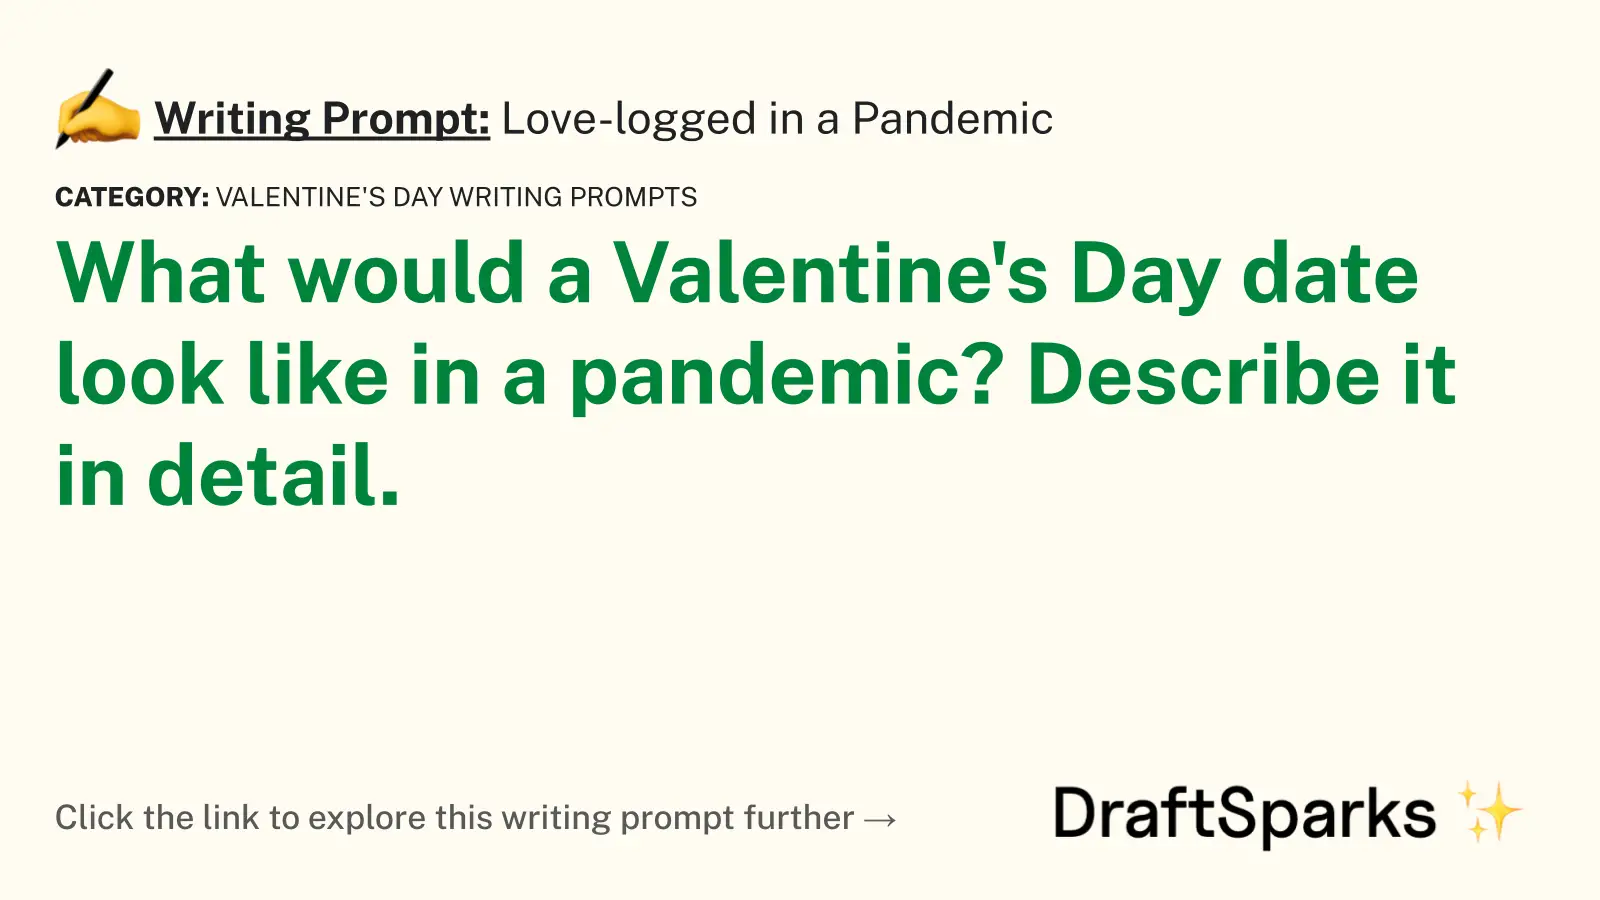 Love-logged in a Pandemic